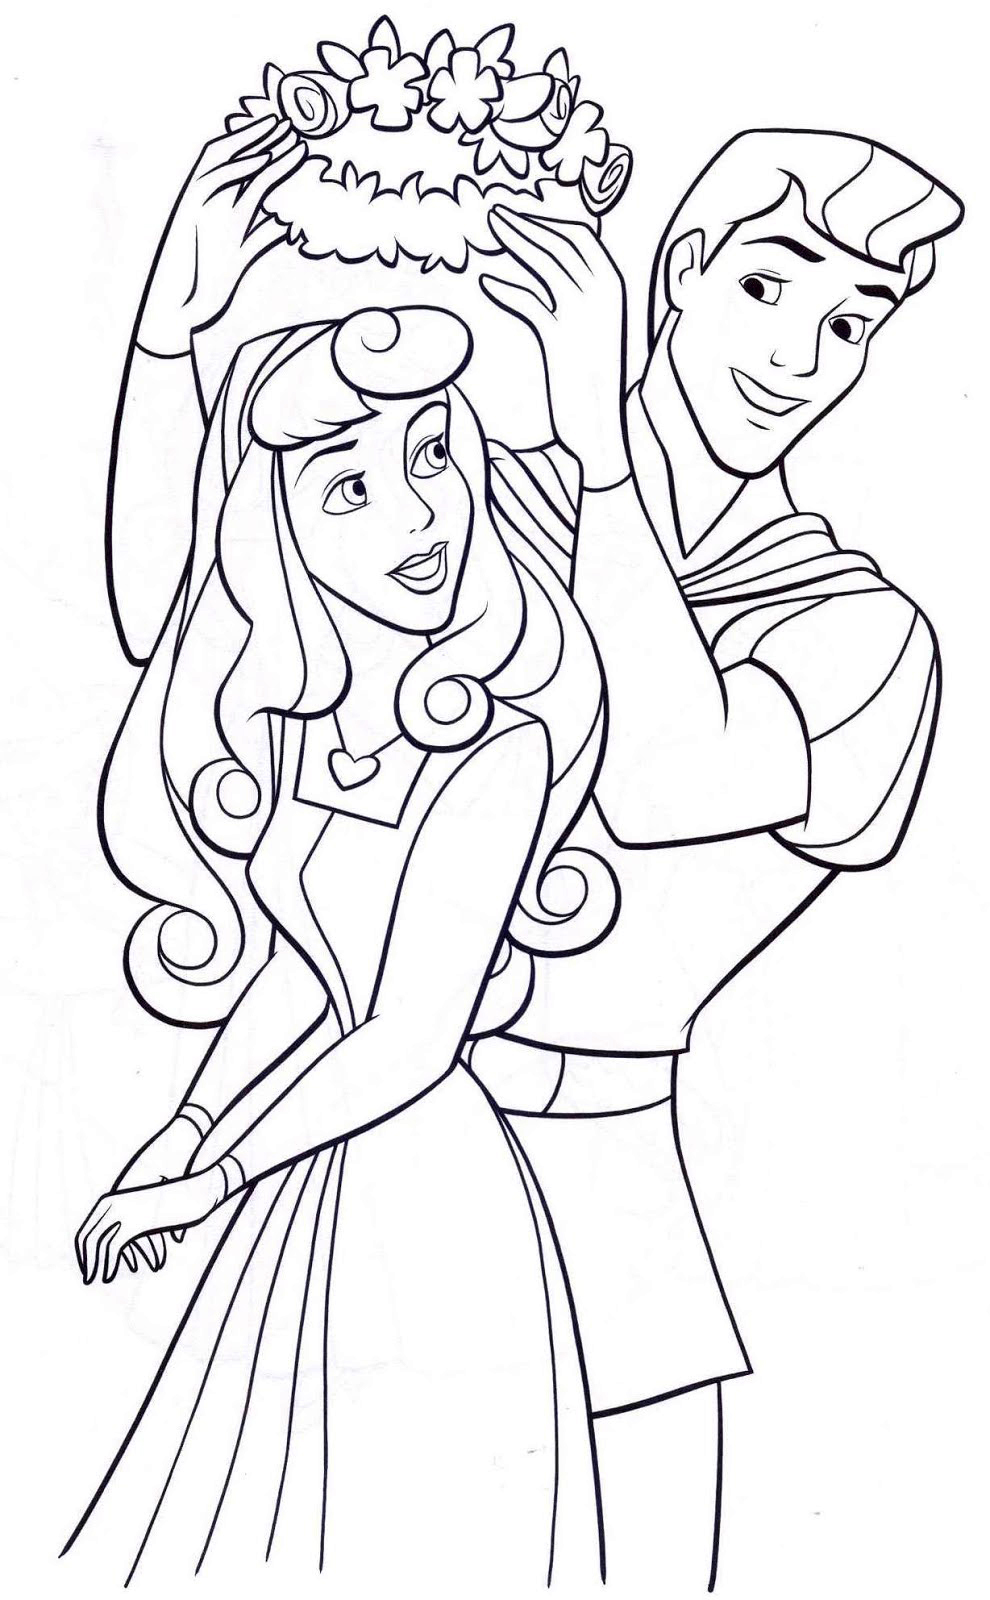 Download Princess Coloring Pages - Best Coloring Pages For Kids